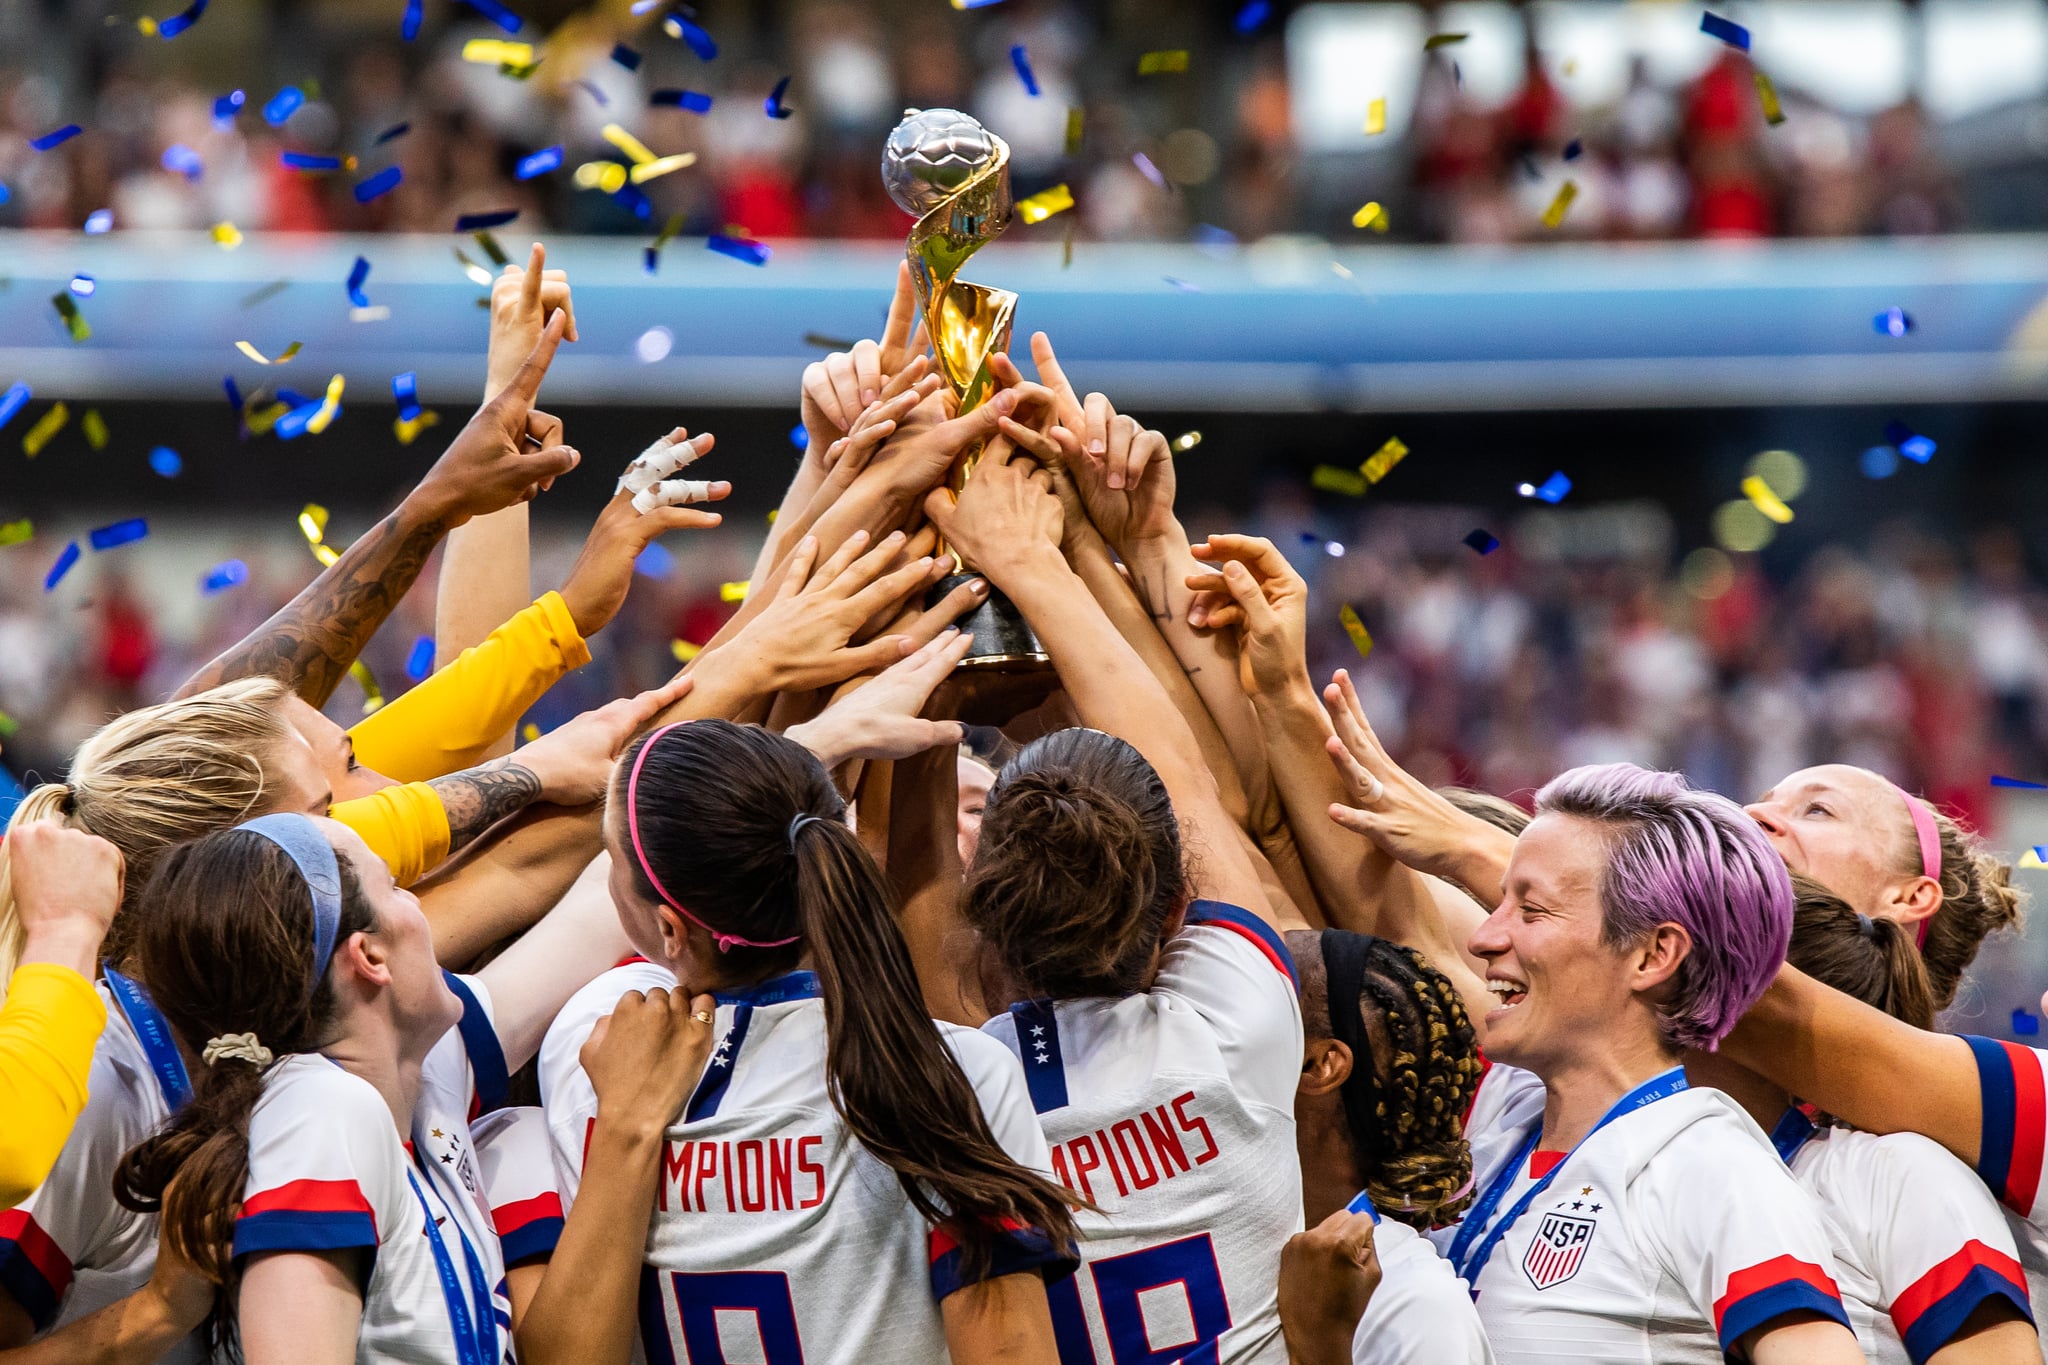 STADE DE LYON, LYON, FRANCE - 2019/07/07: USA women's national team celebrating with trophy after the 2019 FIFA Women's World Cup Final match between The United States of America and The Netherlands at Stade de Lyon.(Final score; USA - Netherlands 2:0). (Photo by Mikoaj Barbanell/SOPA Images/LightRocket via Getty Images)